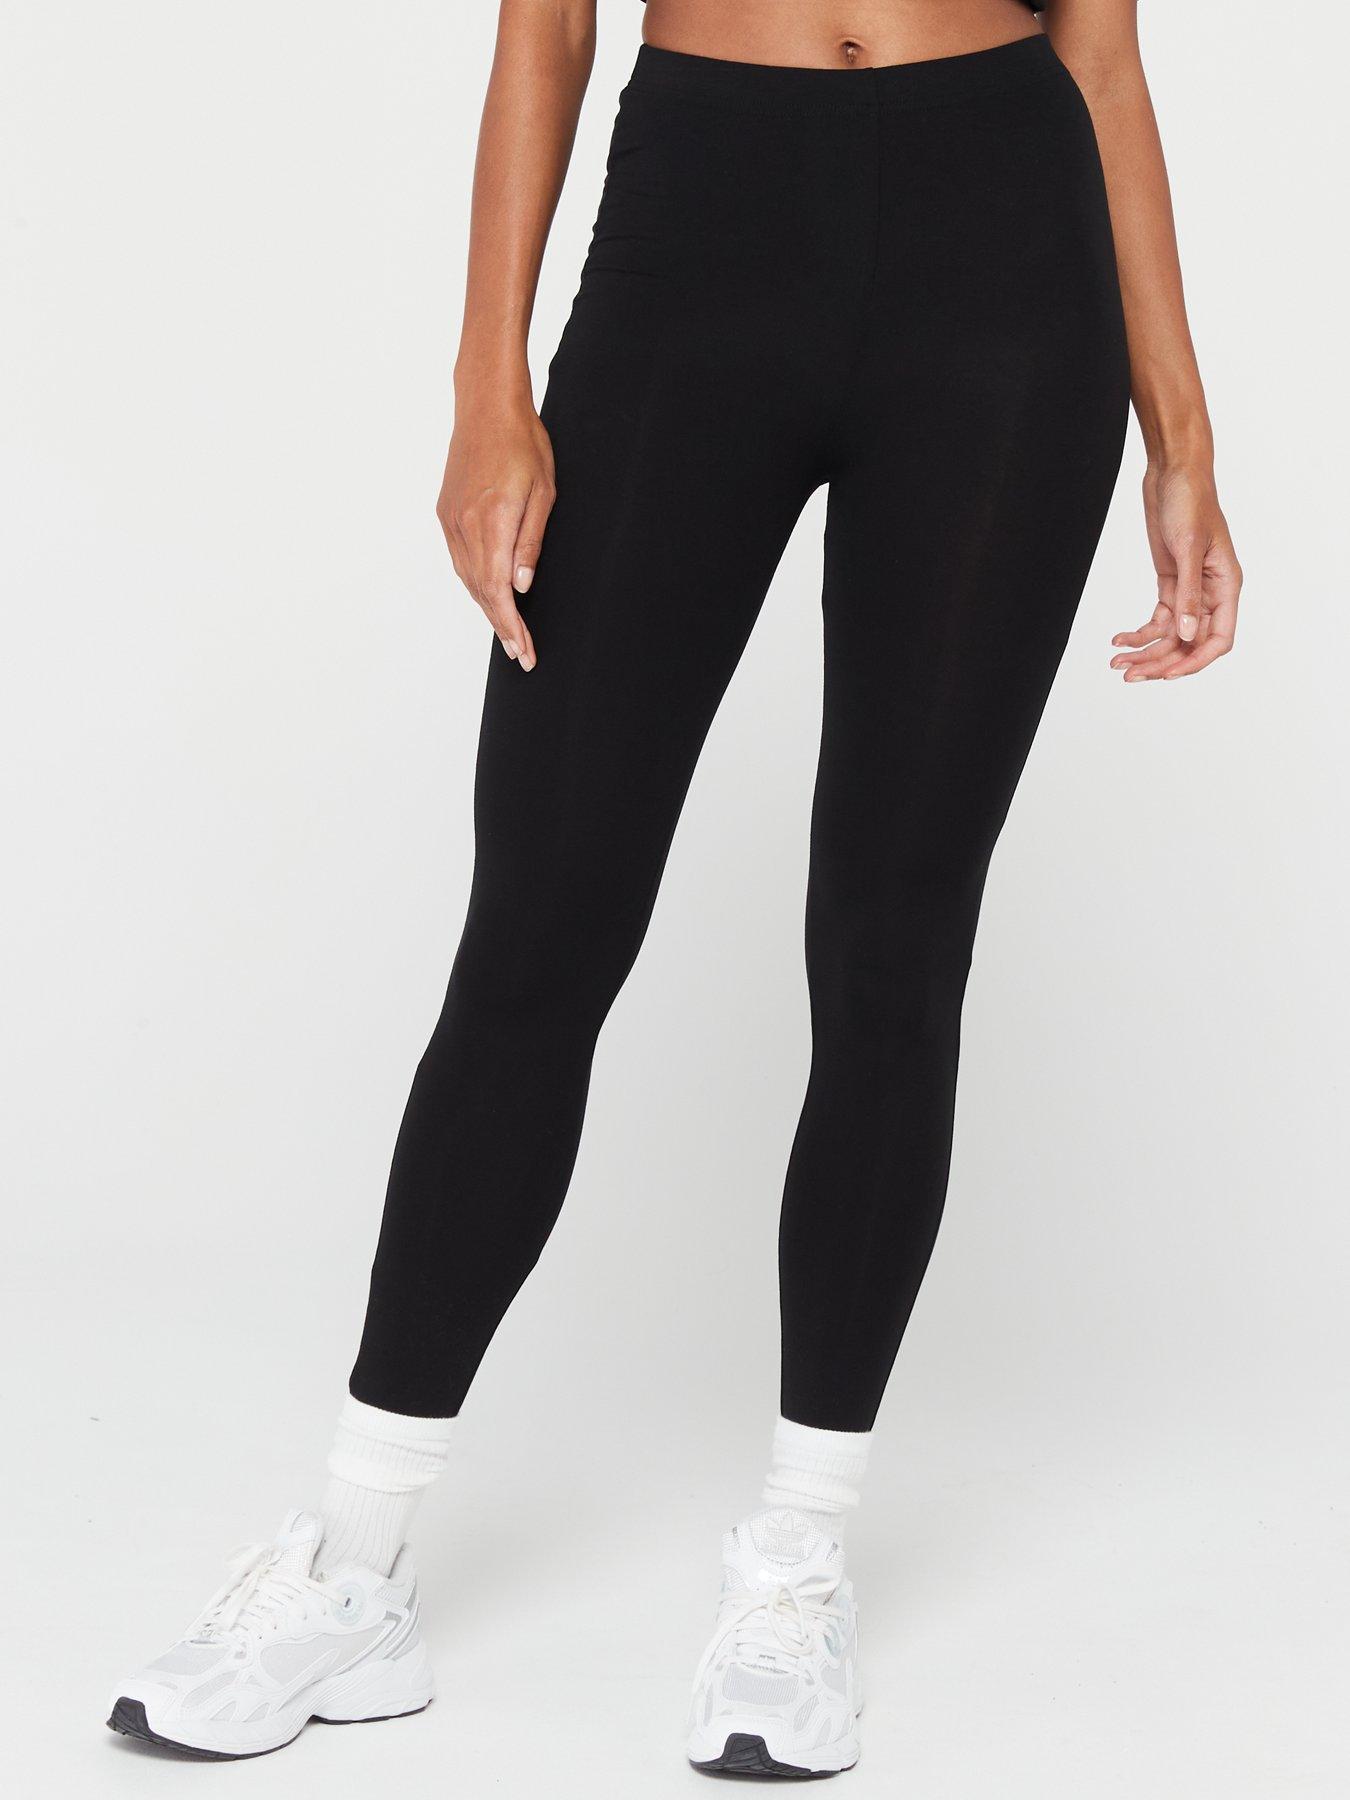 100% Cotton, Lycra And Viscose Black Ladies Leggings at Rs 135 in